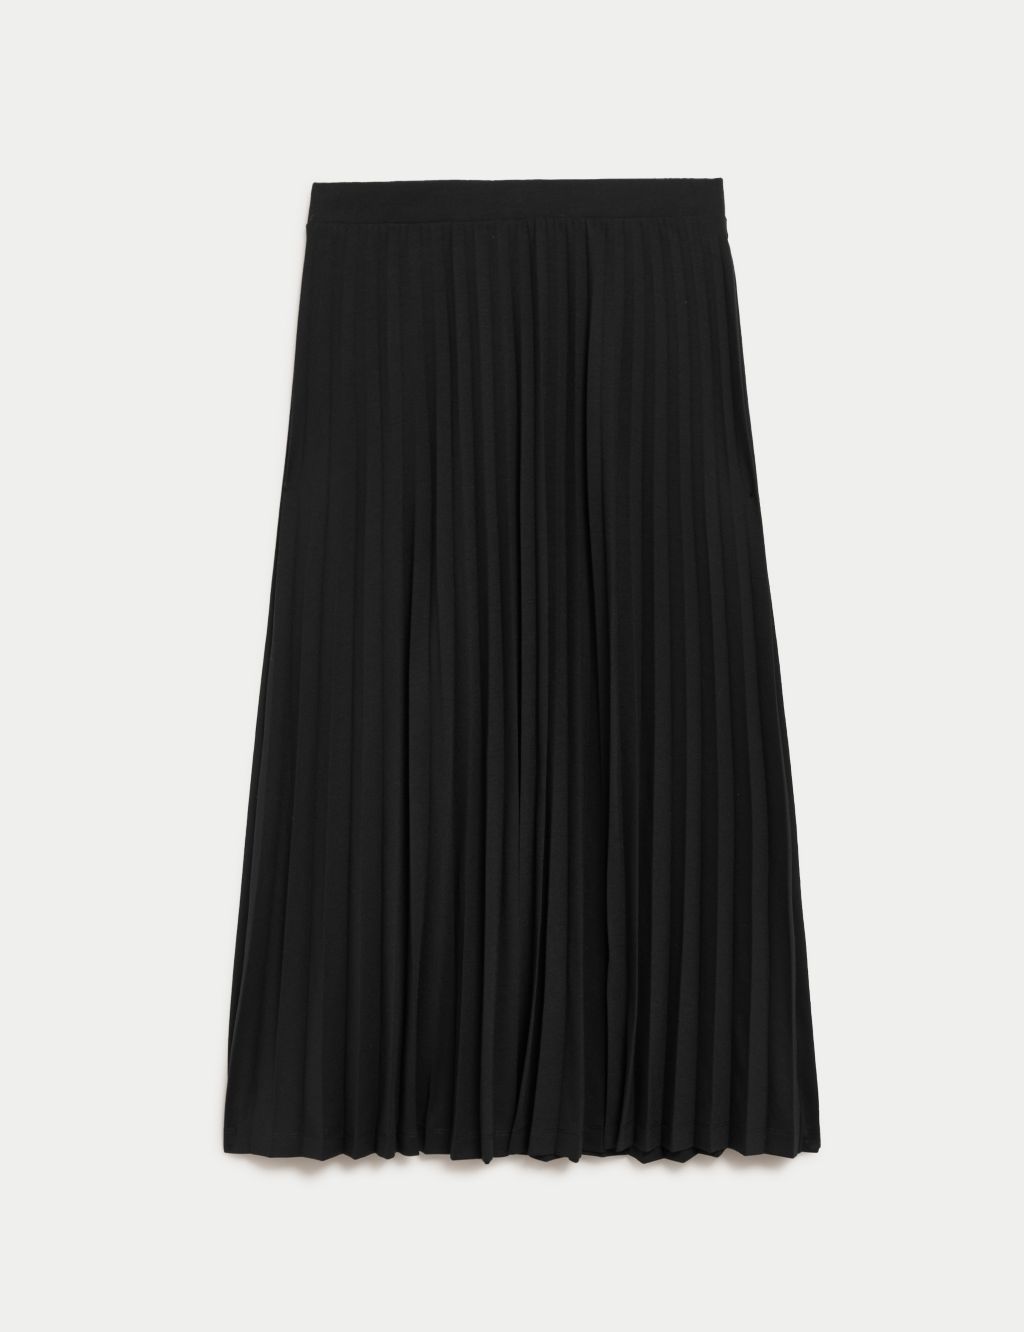 Marks & Spencer, Skirts, Nwt Ms Collection Striped Pleated Midi Skirt  Size Us 8 Tall